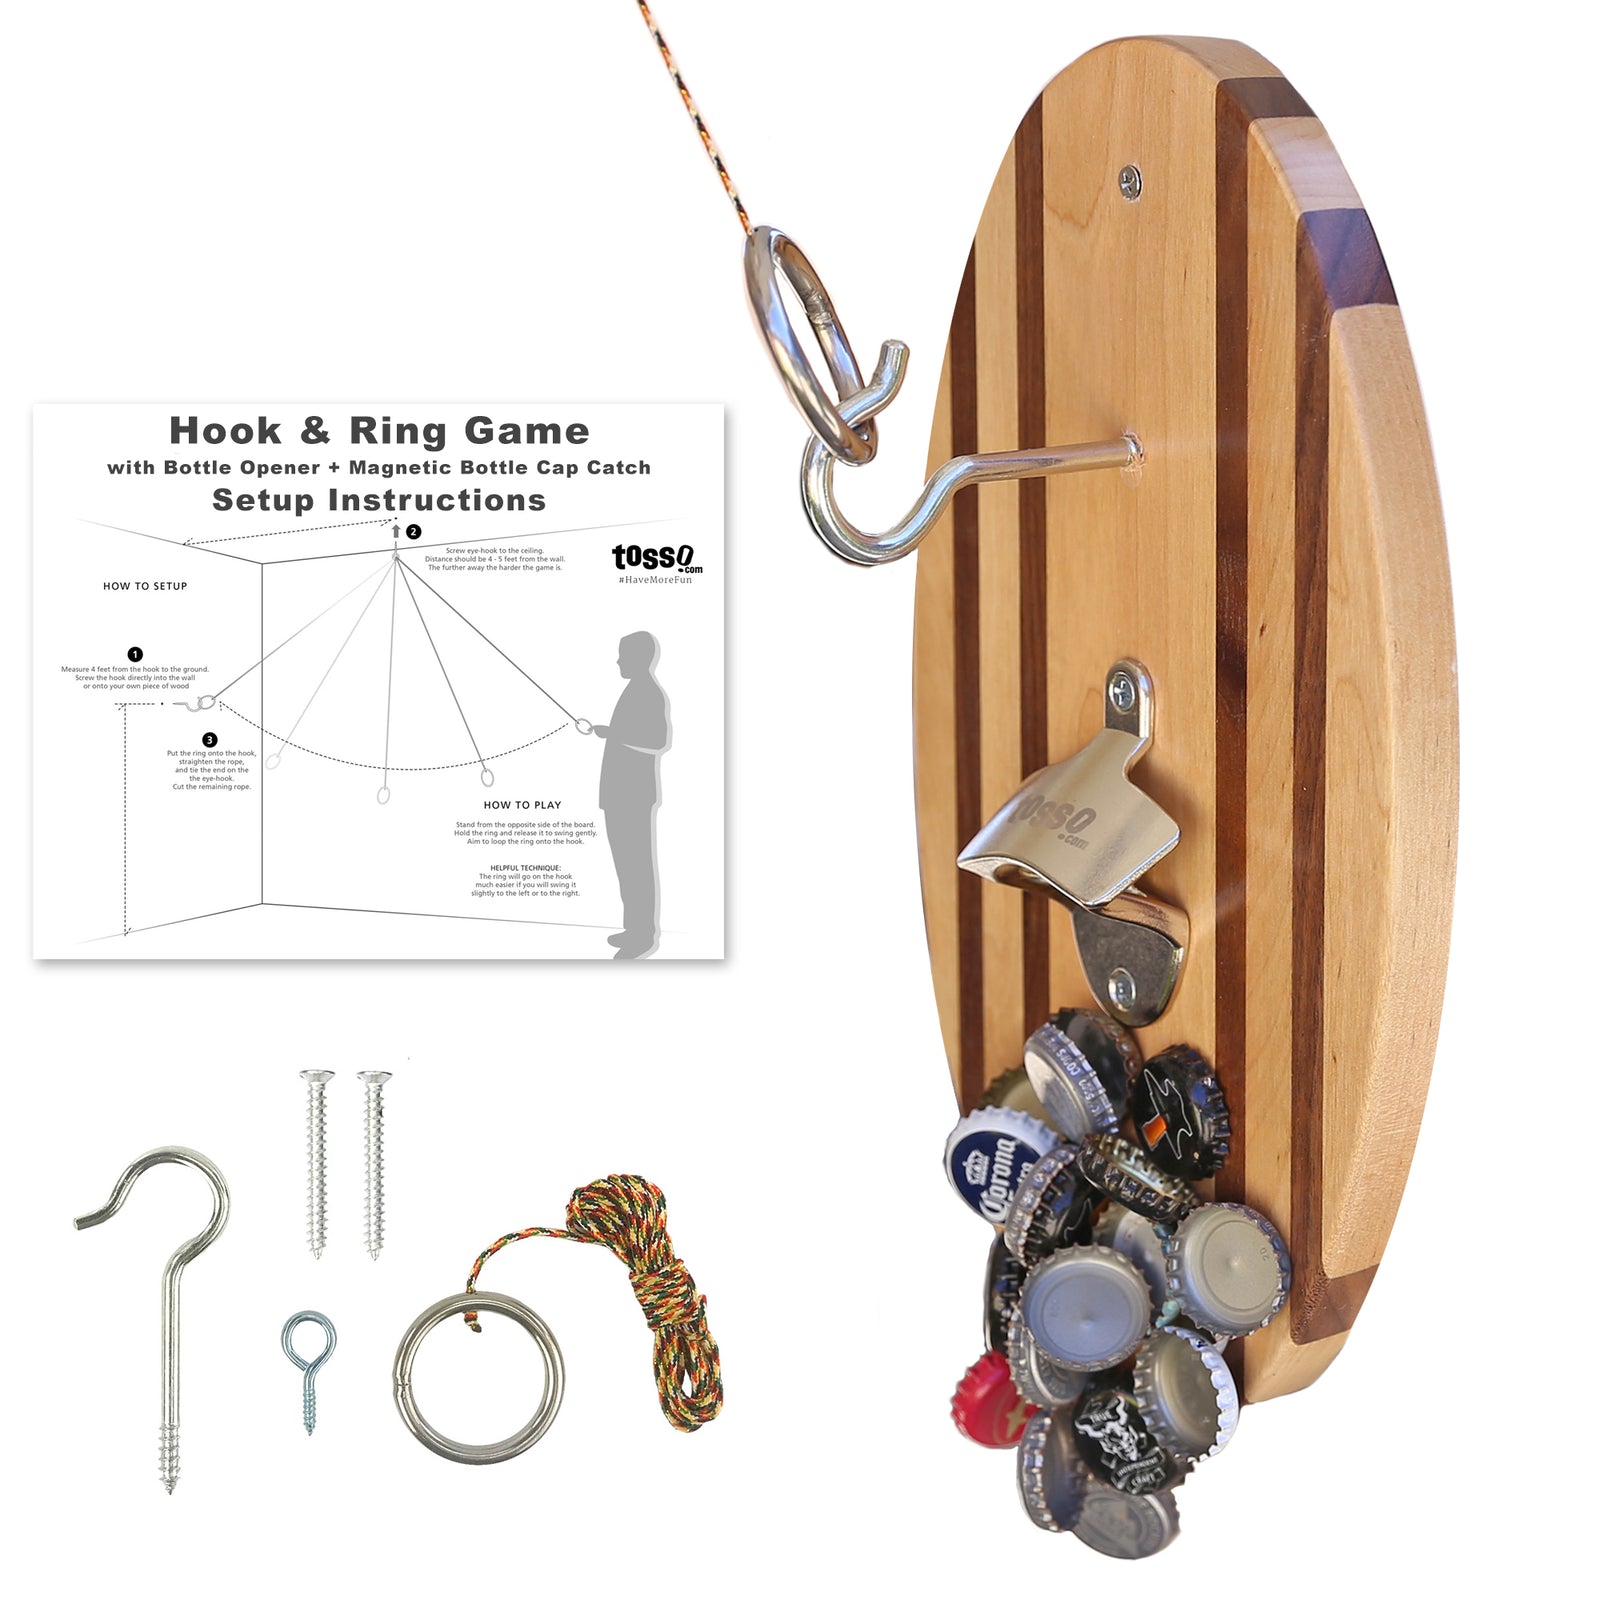 Hammer Crown Hook and Ring Game Pro (Beach Stripes) with Bottle Opener and Magnetic Bottle Cap Catch